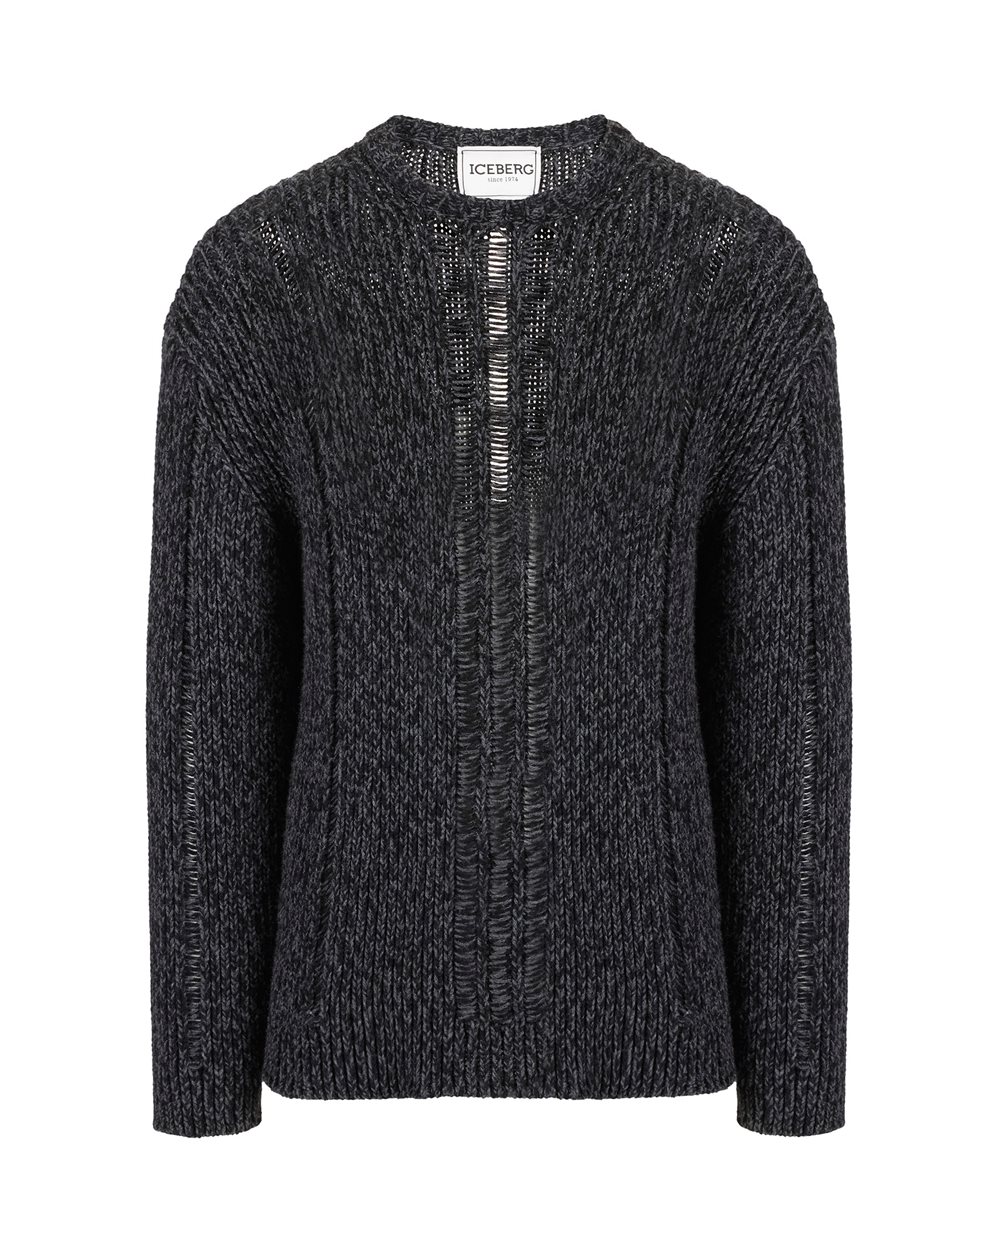 Gray wool blend sweater - carryover  | Iceberg - Official Website